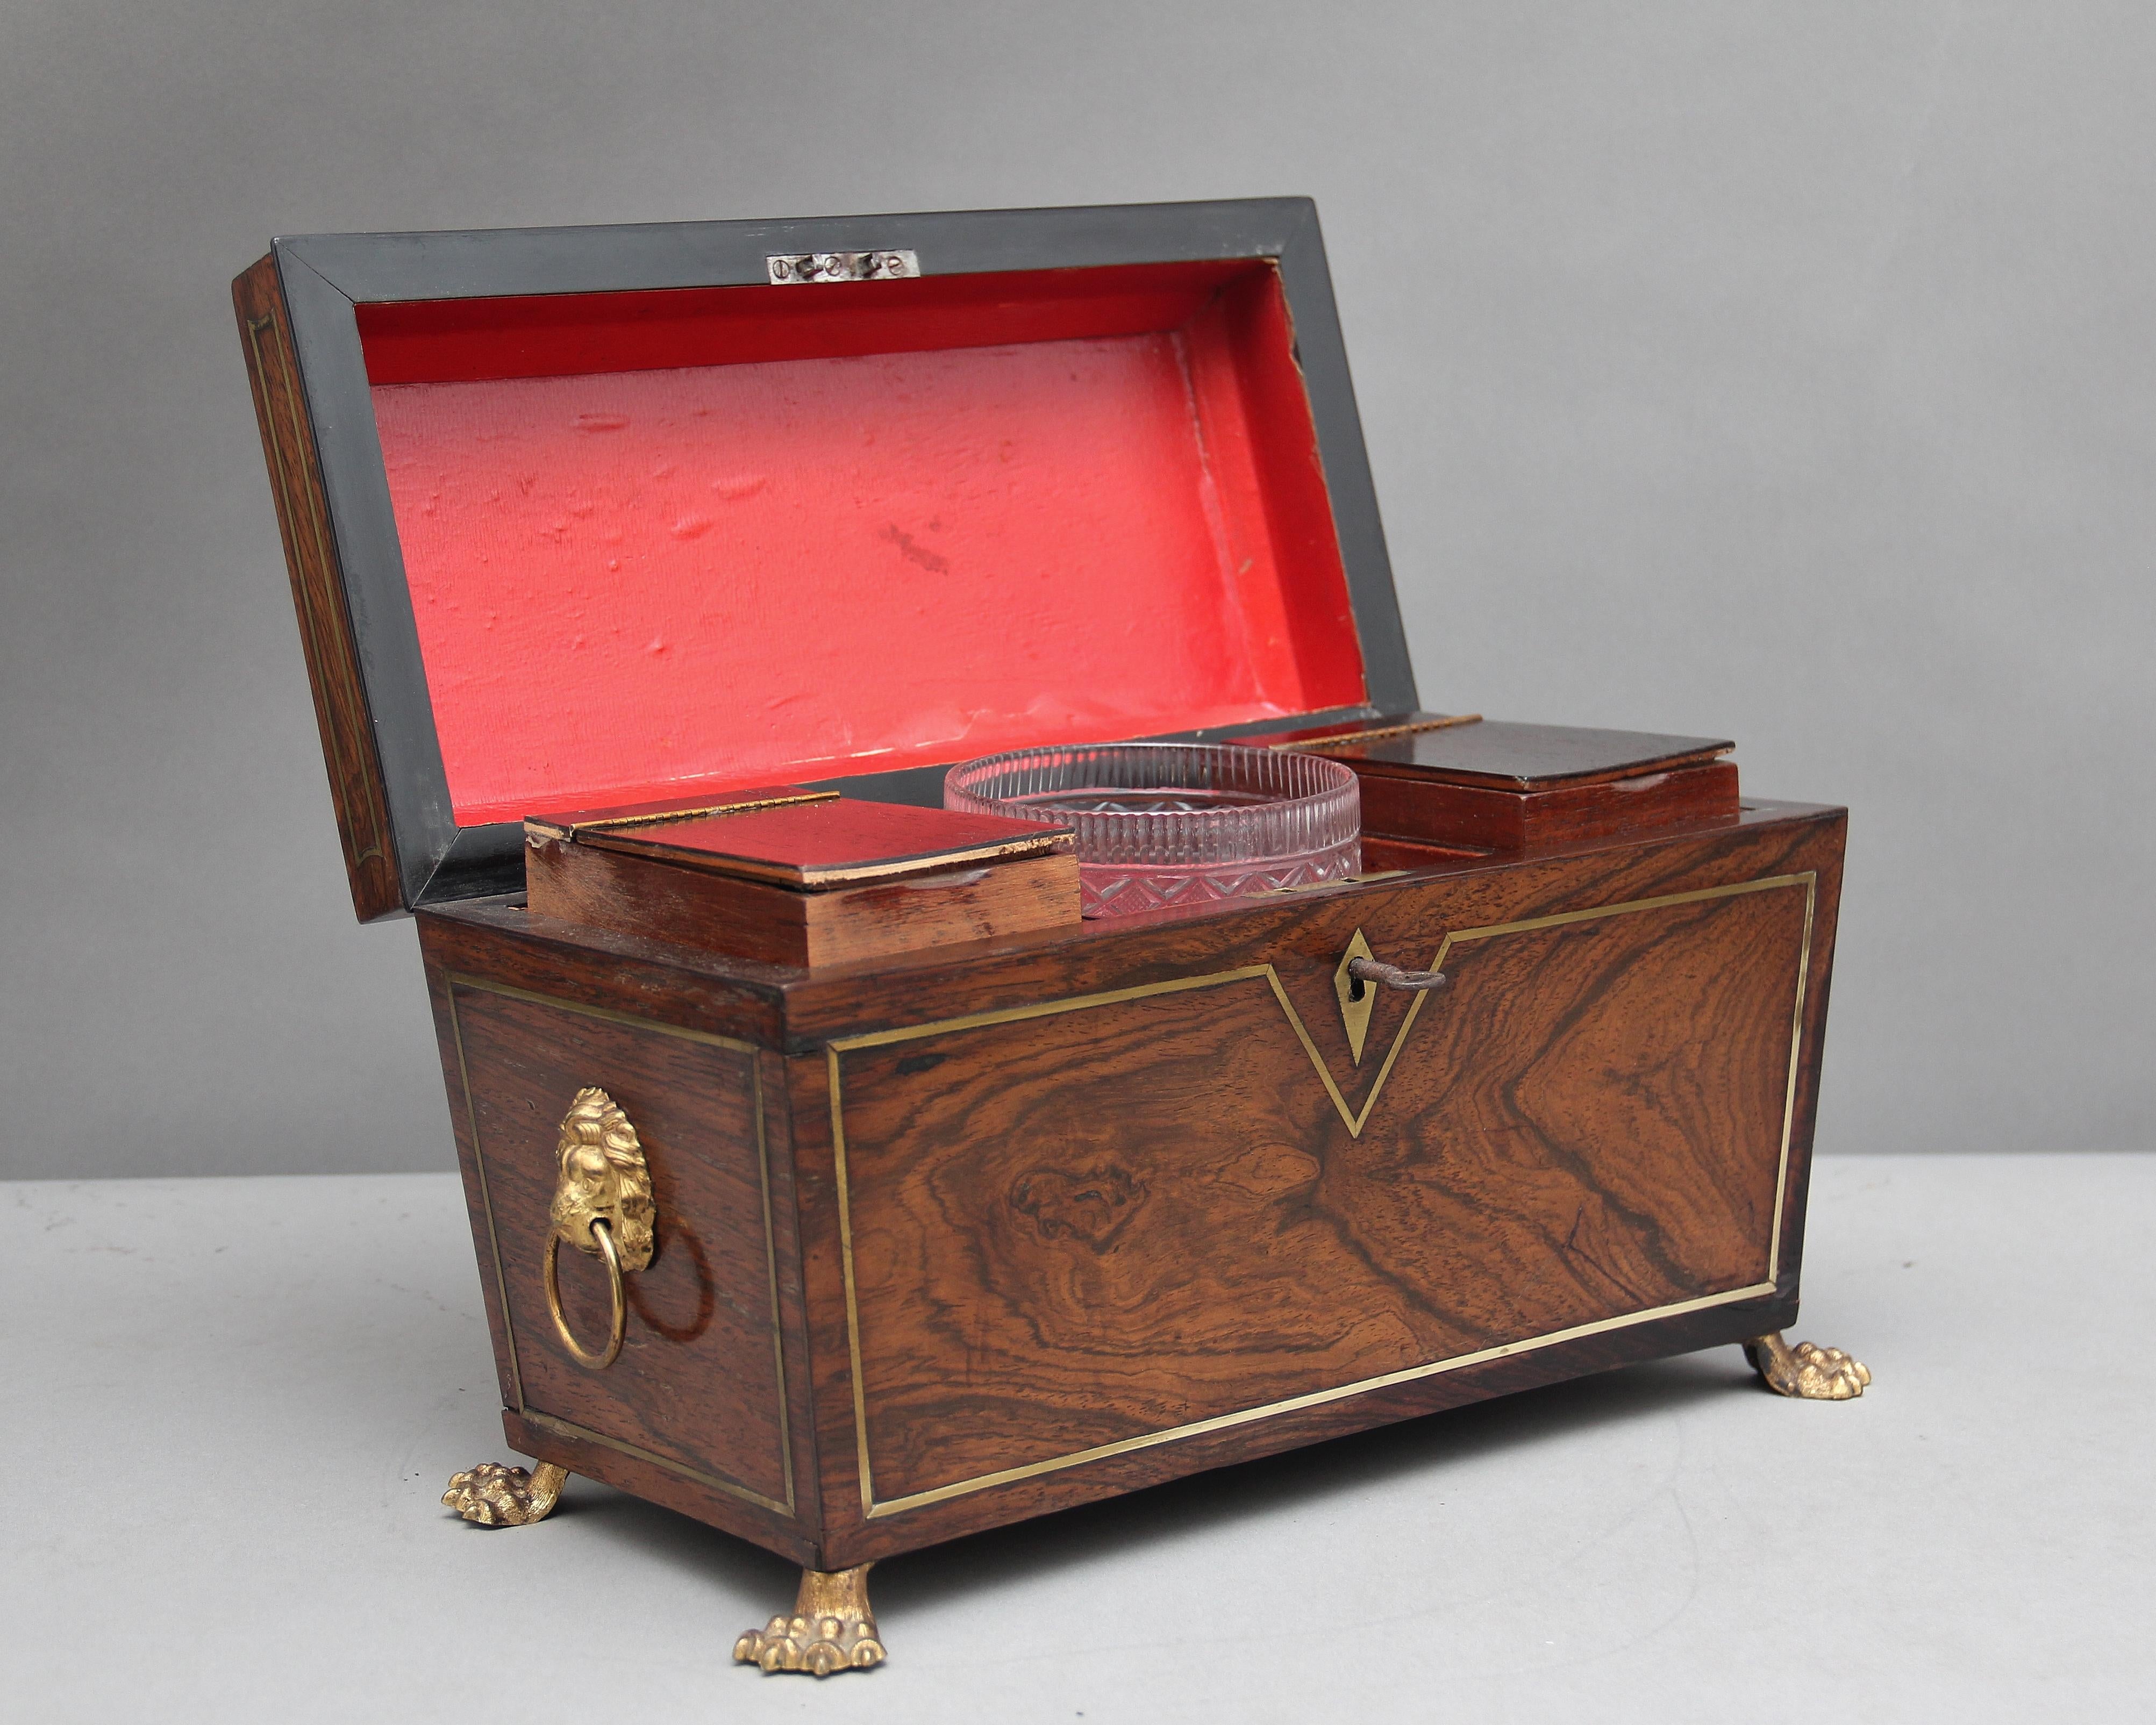 A lovely quality Regency rosewood and brass inlaid tea caddy of sarcophagus form, the hinged top opening to reveal a fitted interior consisting of centre cut glass mixing bowl flanked by twin hinged caddies, the sides of the caddy decorated with